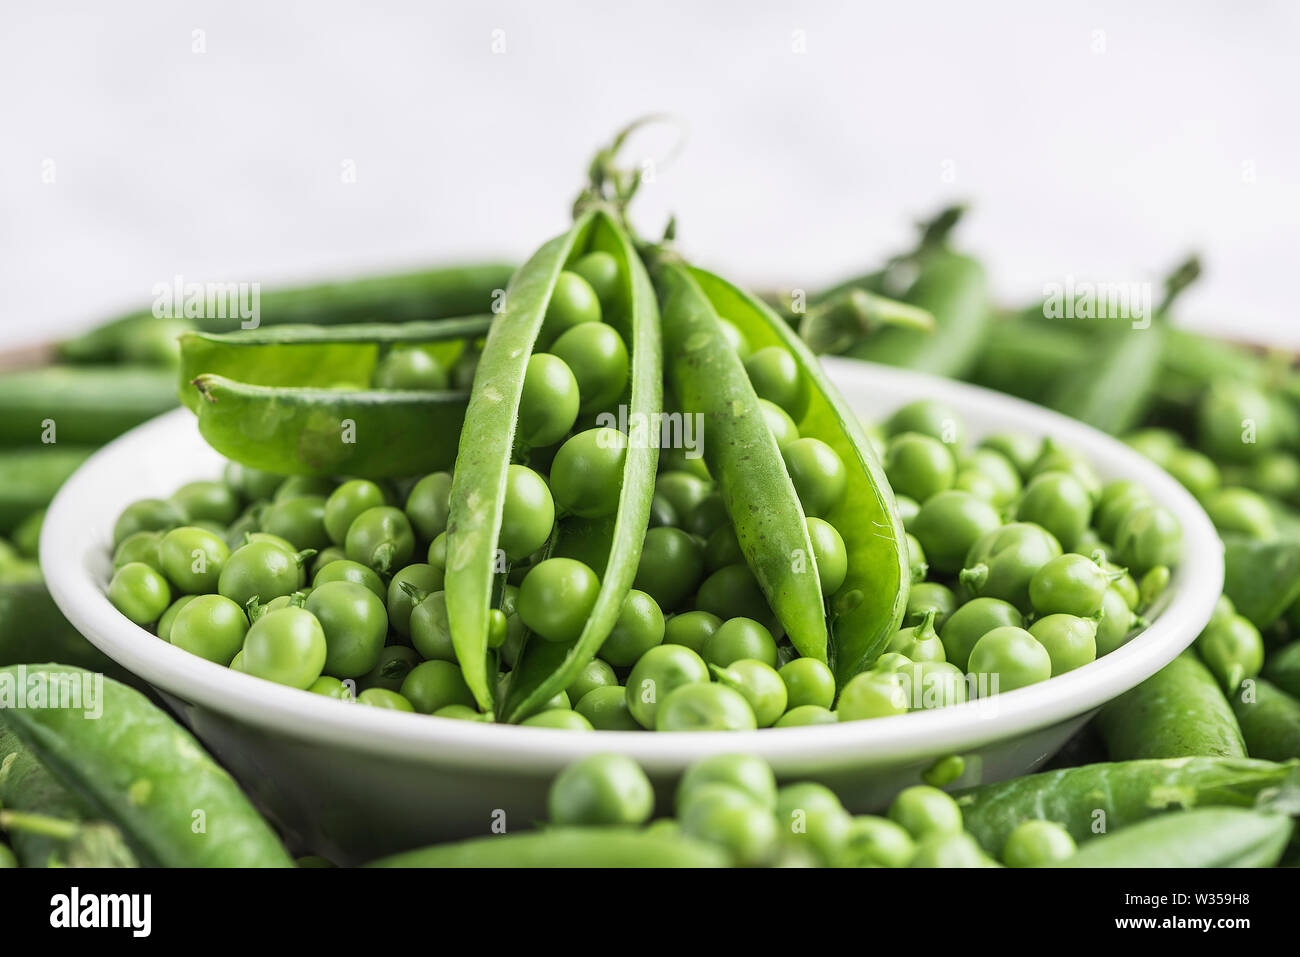 Bowl of Fresh garden peas with peas in the pod and empty pods Stock Photo